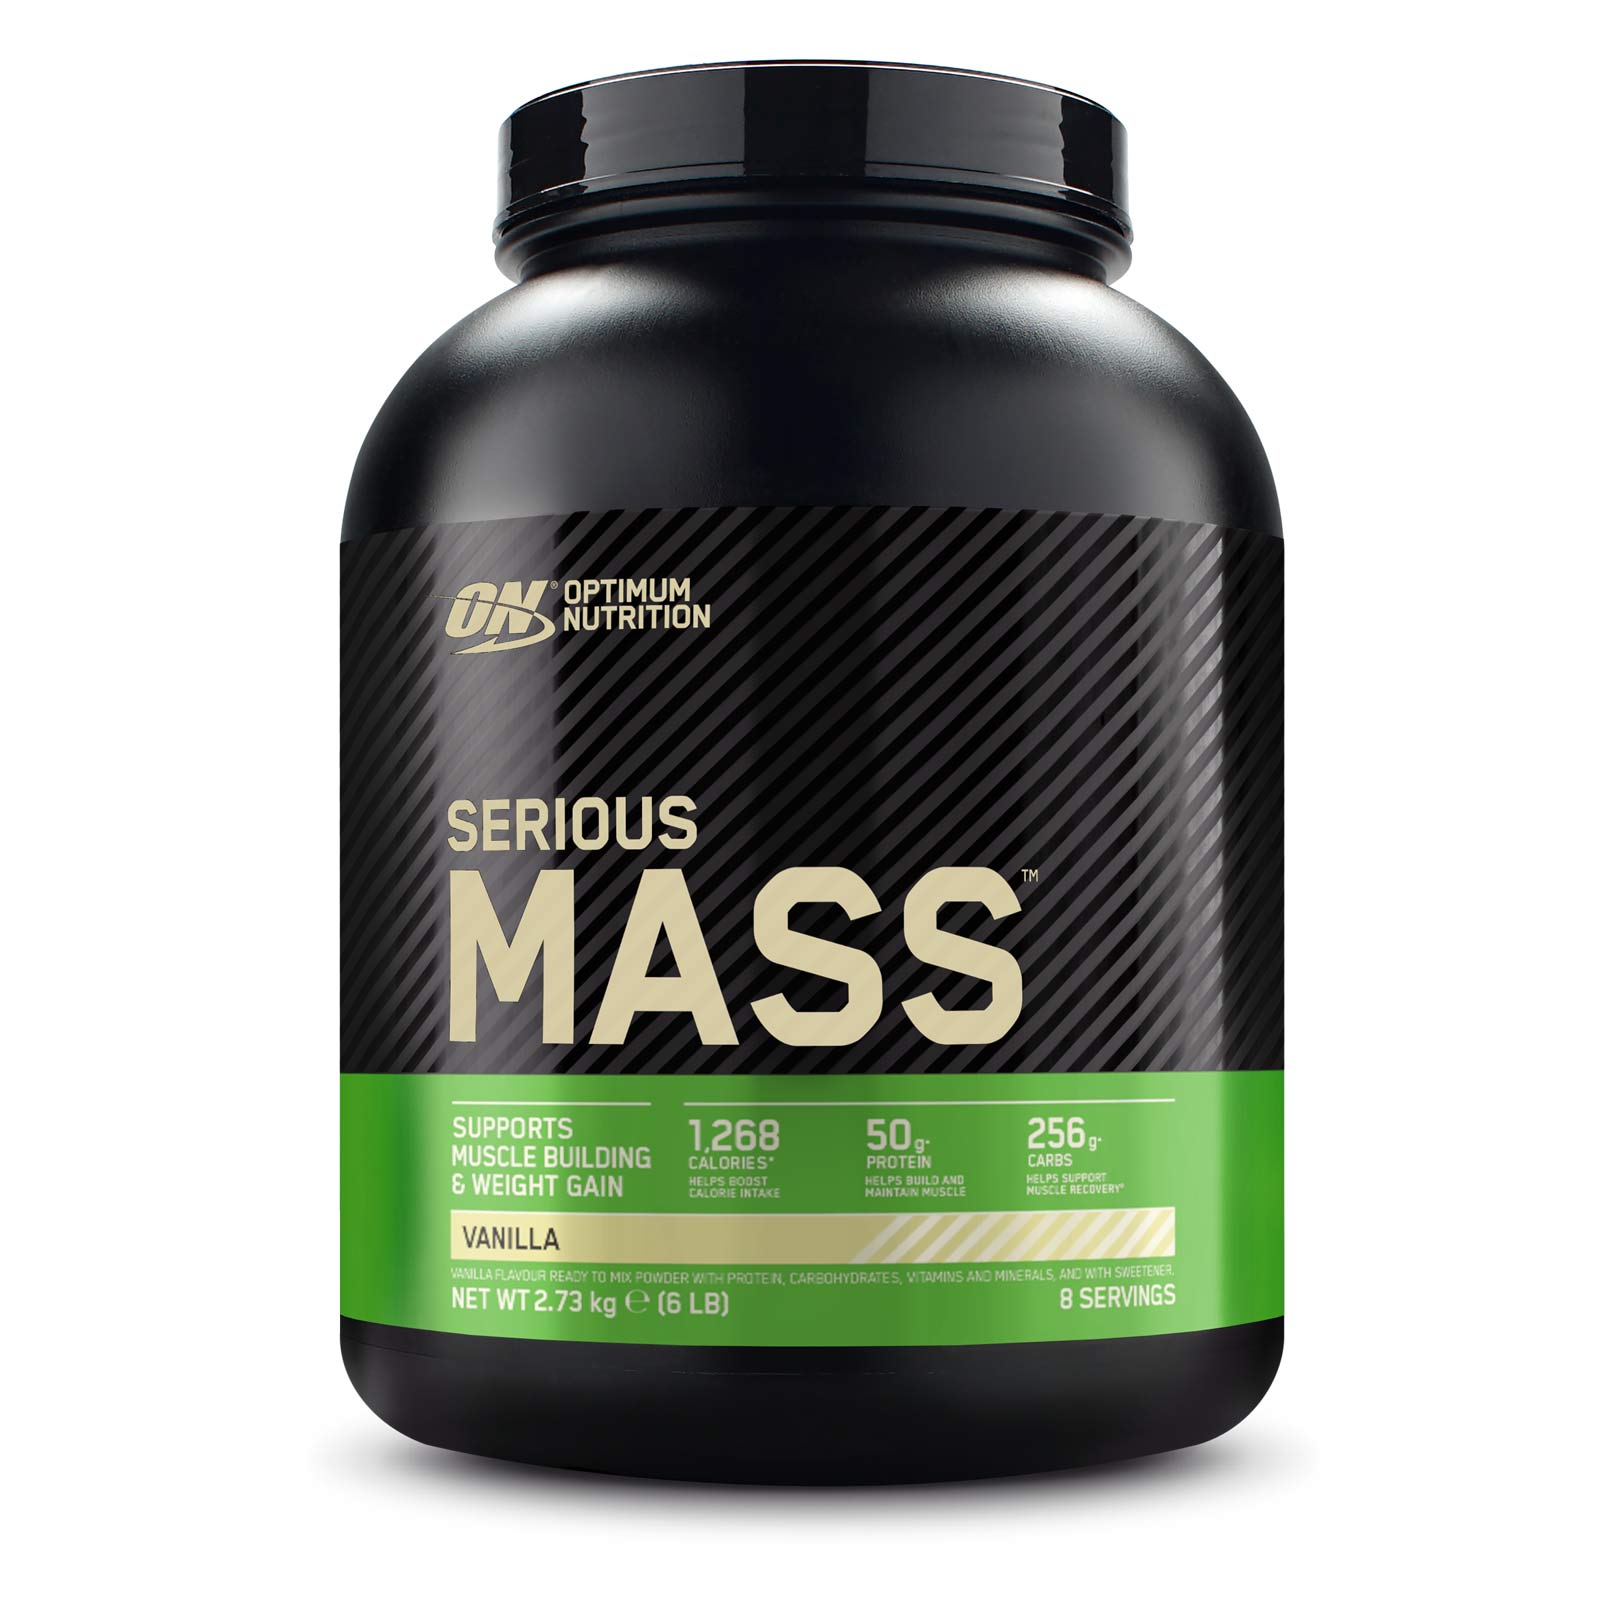 ON SERIOUS MASS 2.7KG TUB